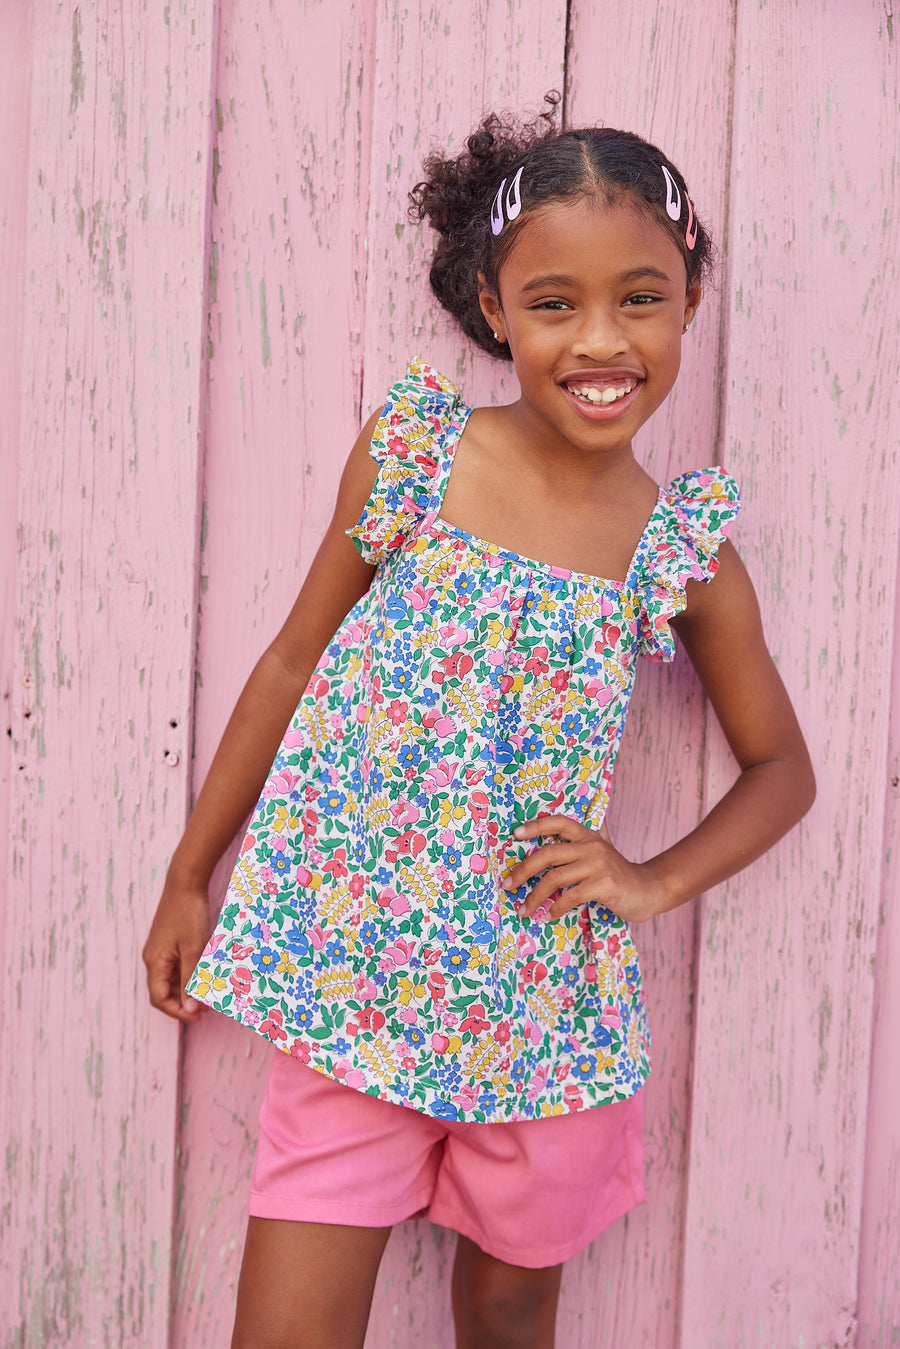 Little girl wearing ruffle adjustable strap top which features a square neckline and a colorful floral print. 